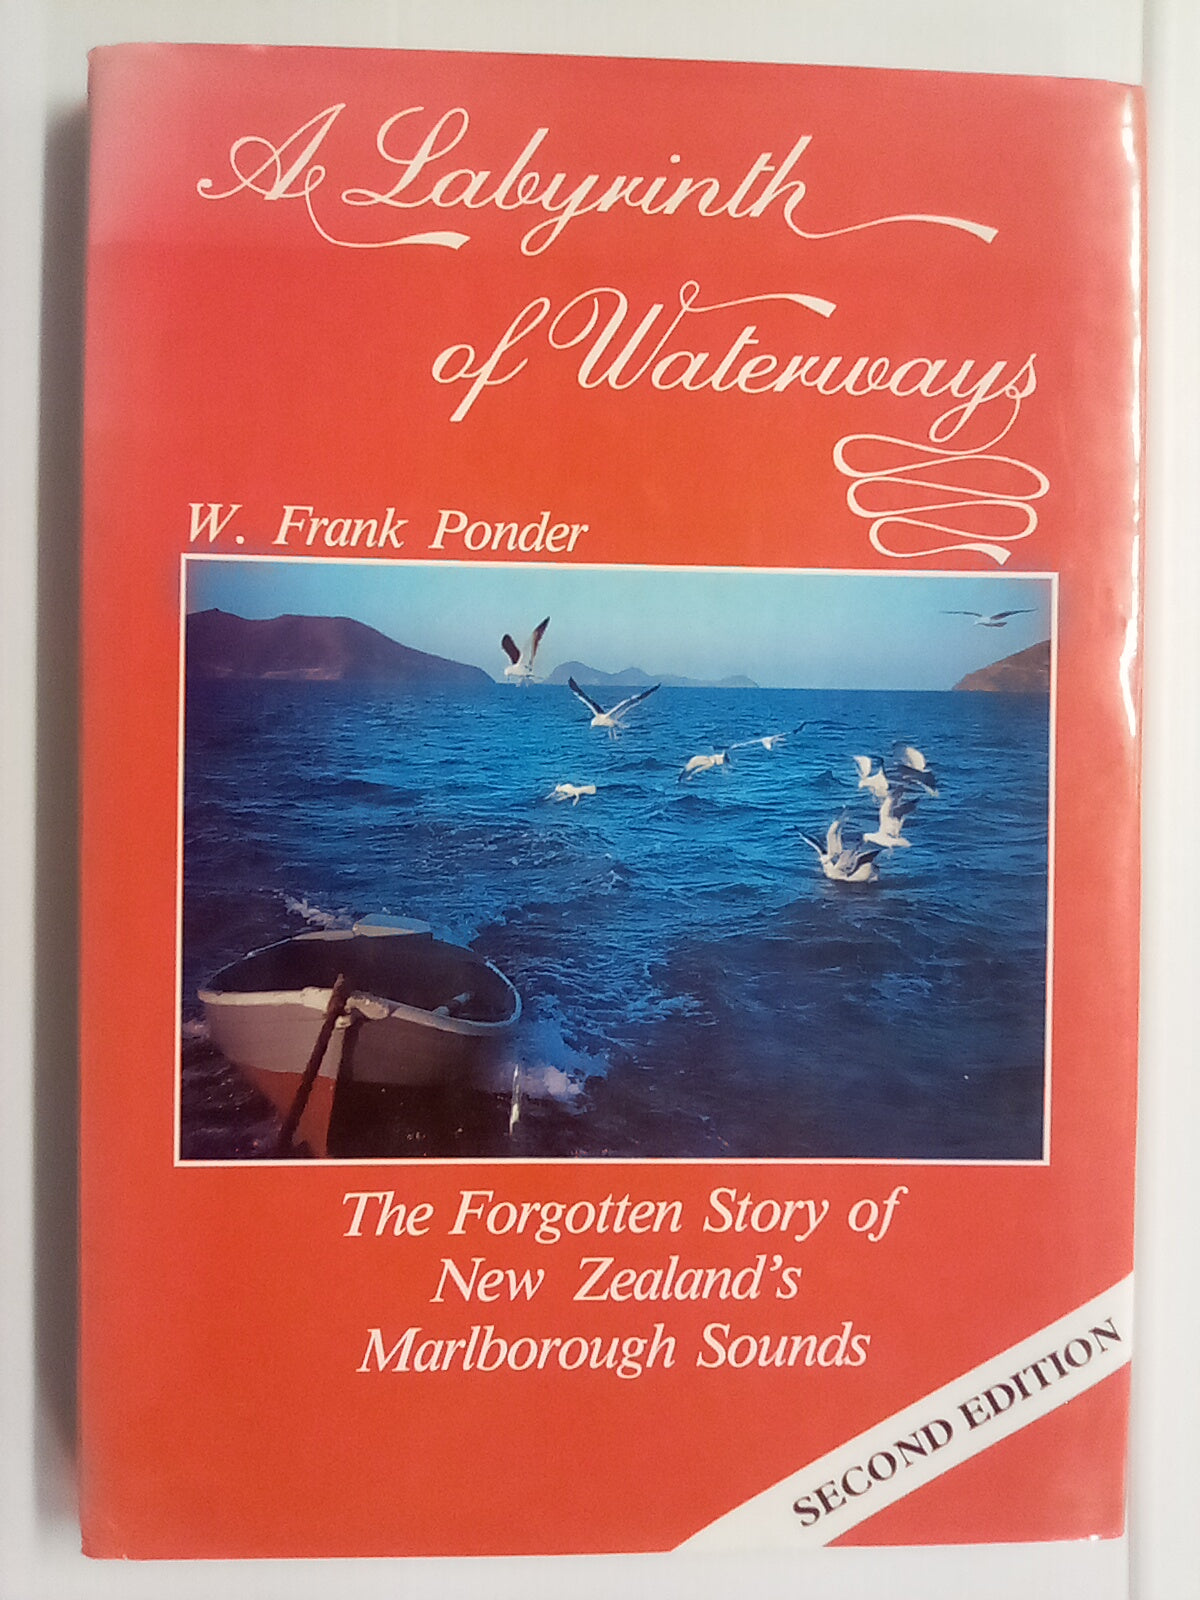 A Labyrinth of Waterways - The Forgotten Story of the Marlborough Sounds